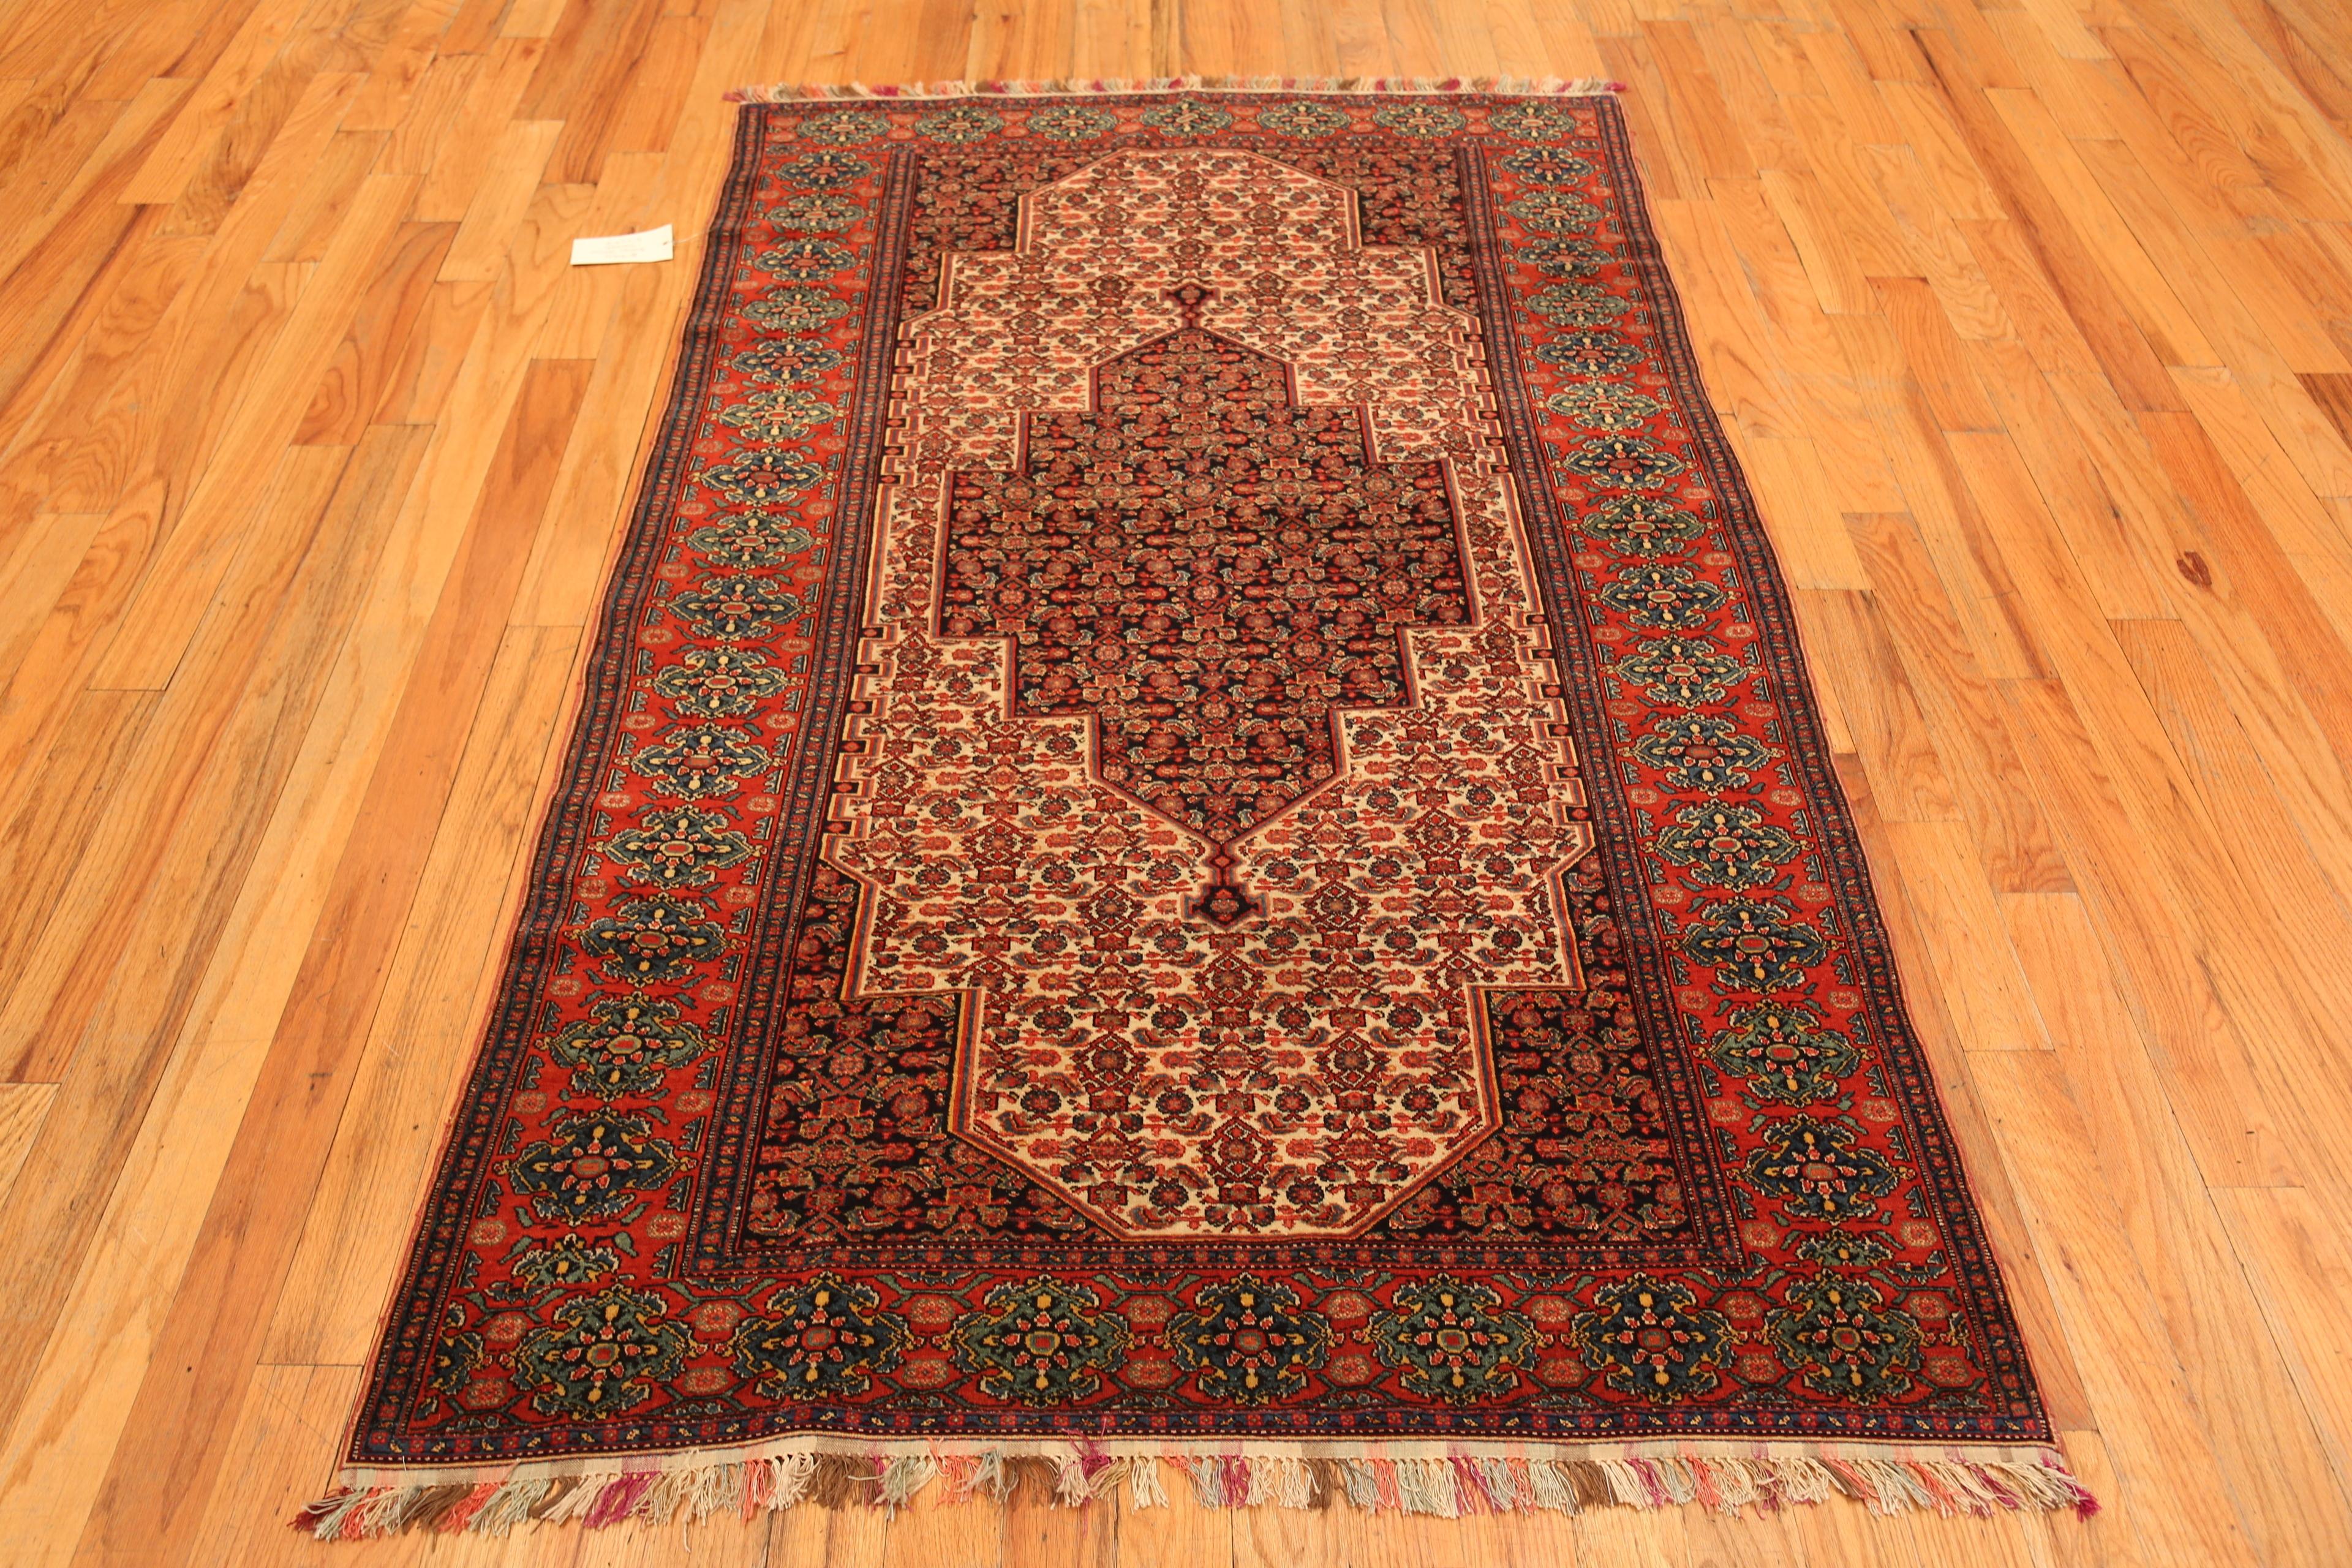 Fine Antique Persian Senneh Rug, Country of Origin: Persia, Circa date: 1880. Size: 4 ft 3 in x 6 ft 11 in (1.3 m x 2.11 m)

